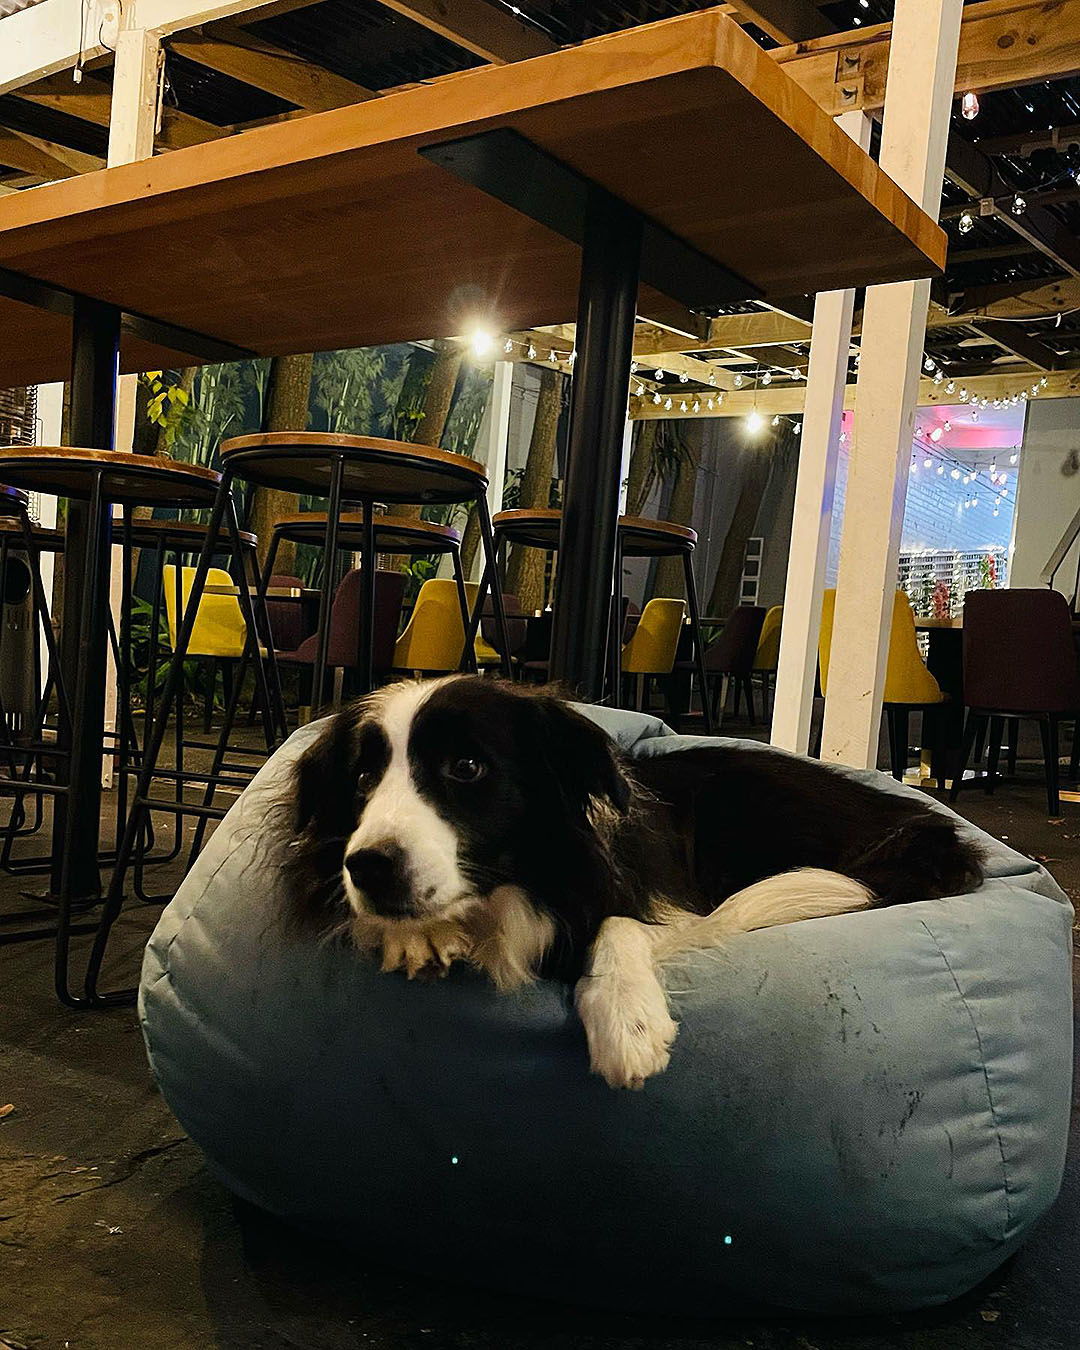 A dog relaxes on a bean bag at the Paw bar and eatery, one of the best dog-friendly bars and restaurants in Auckland.